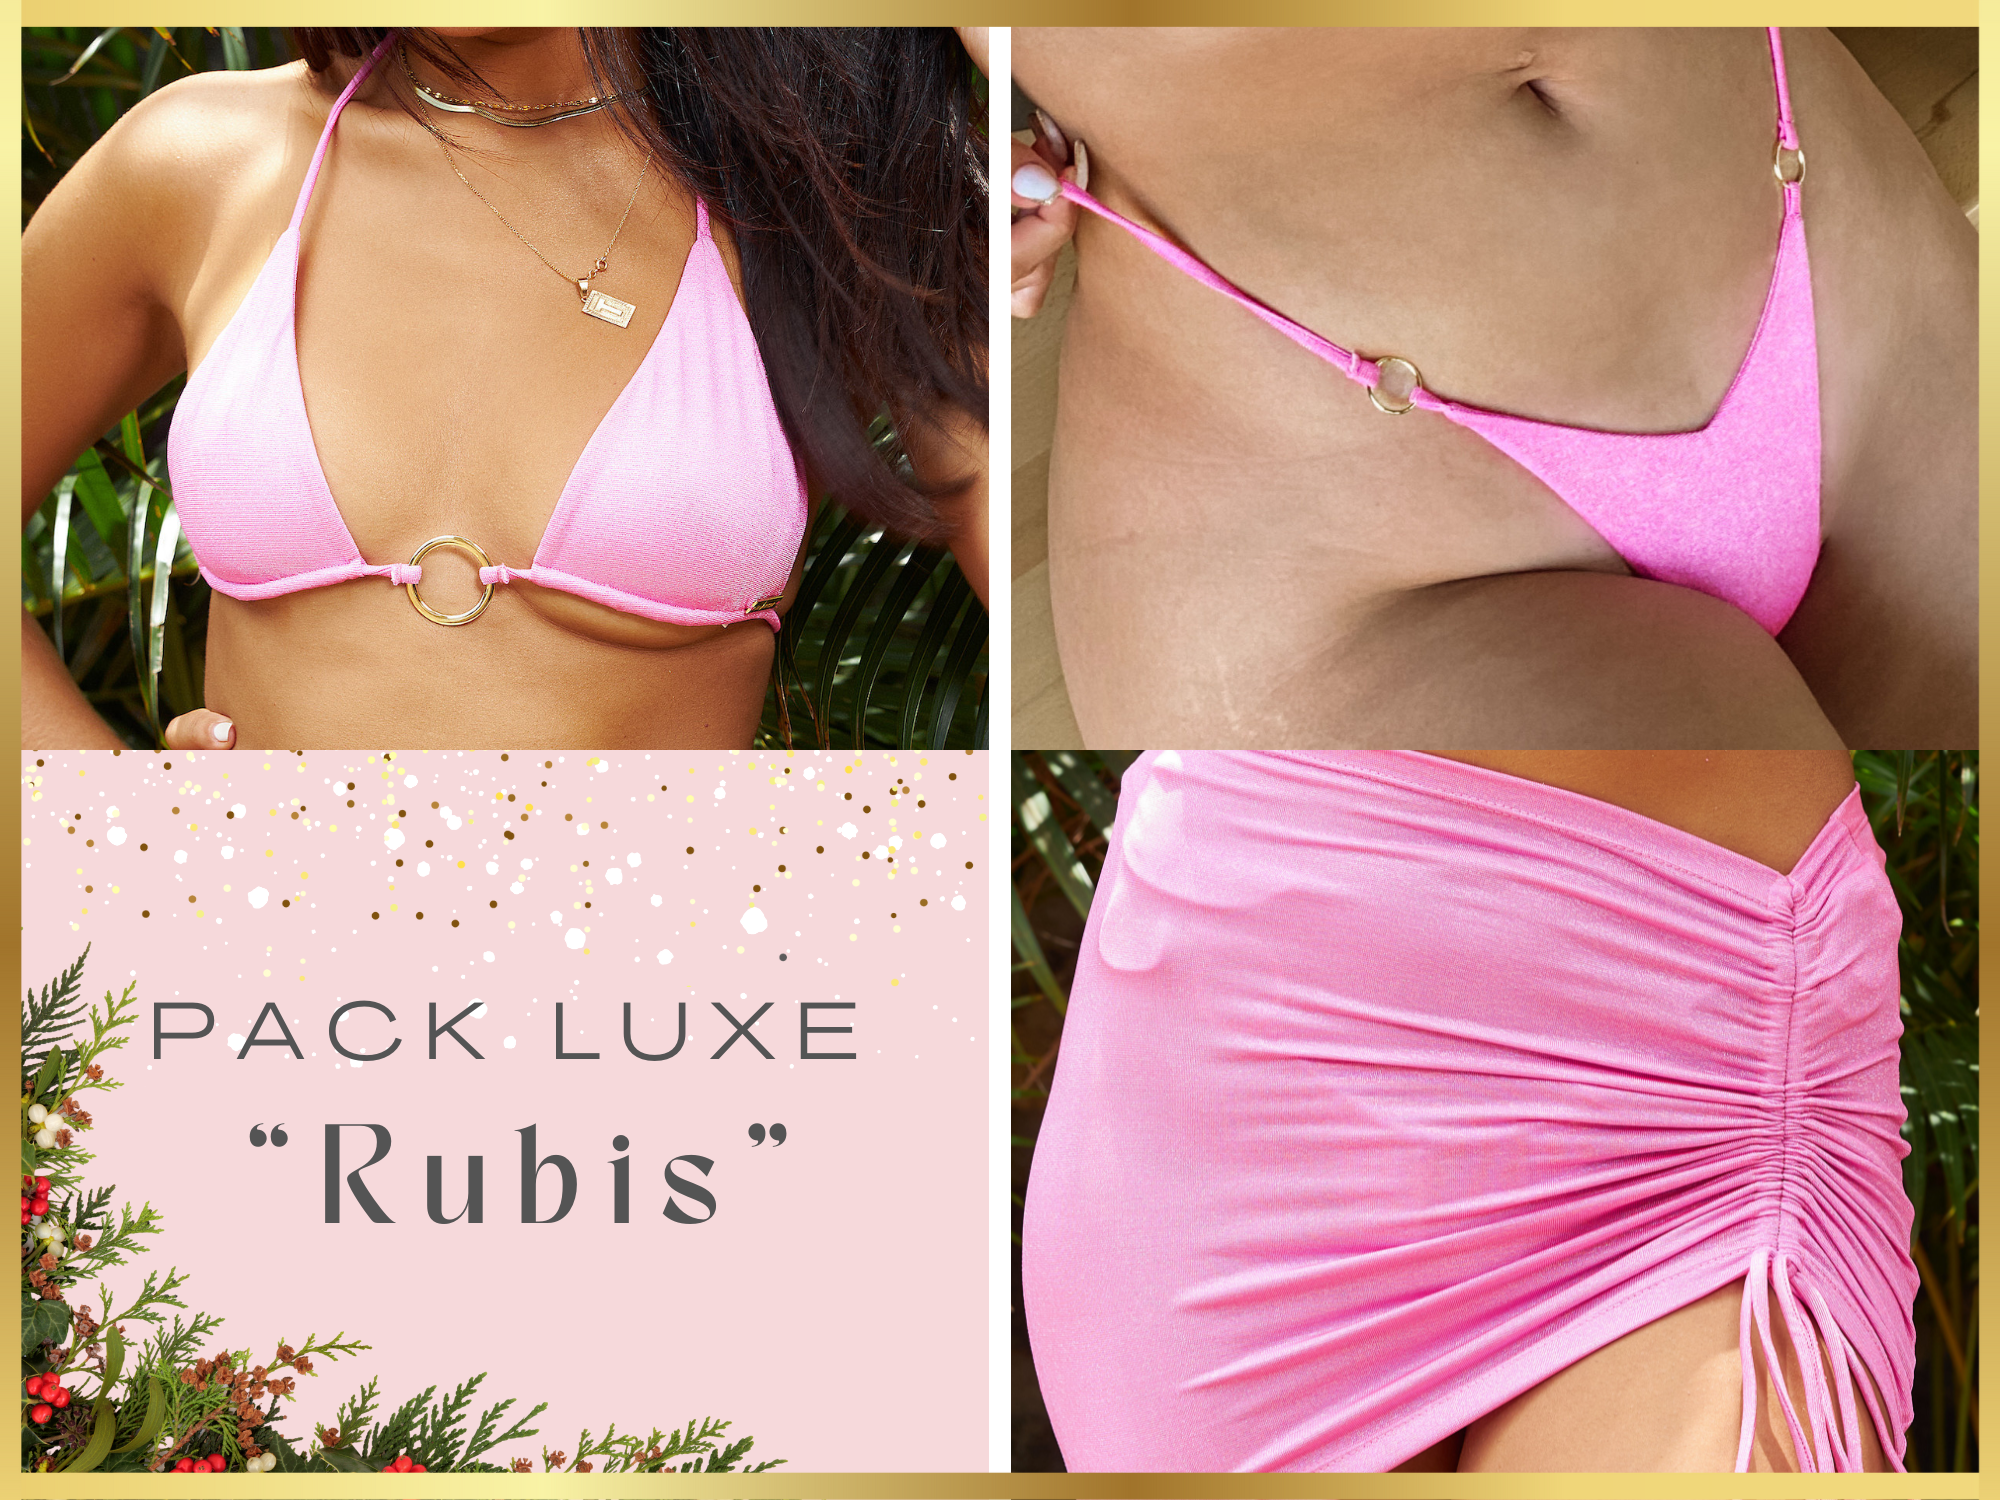 PACK LUXE "RUBIS"